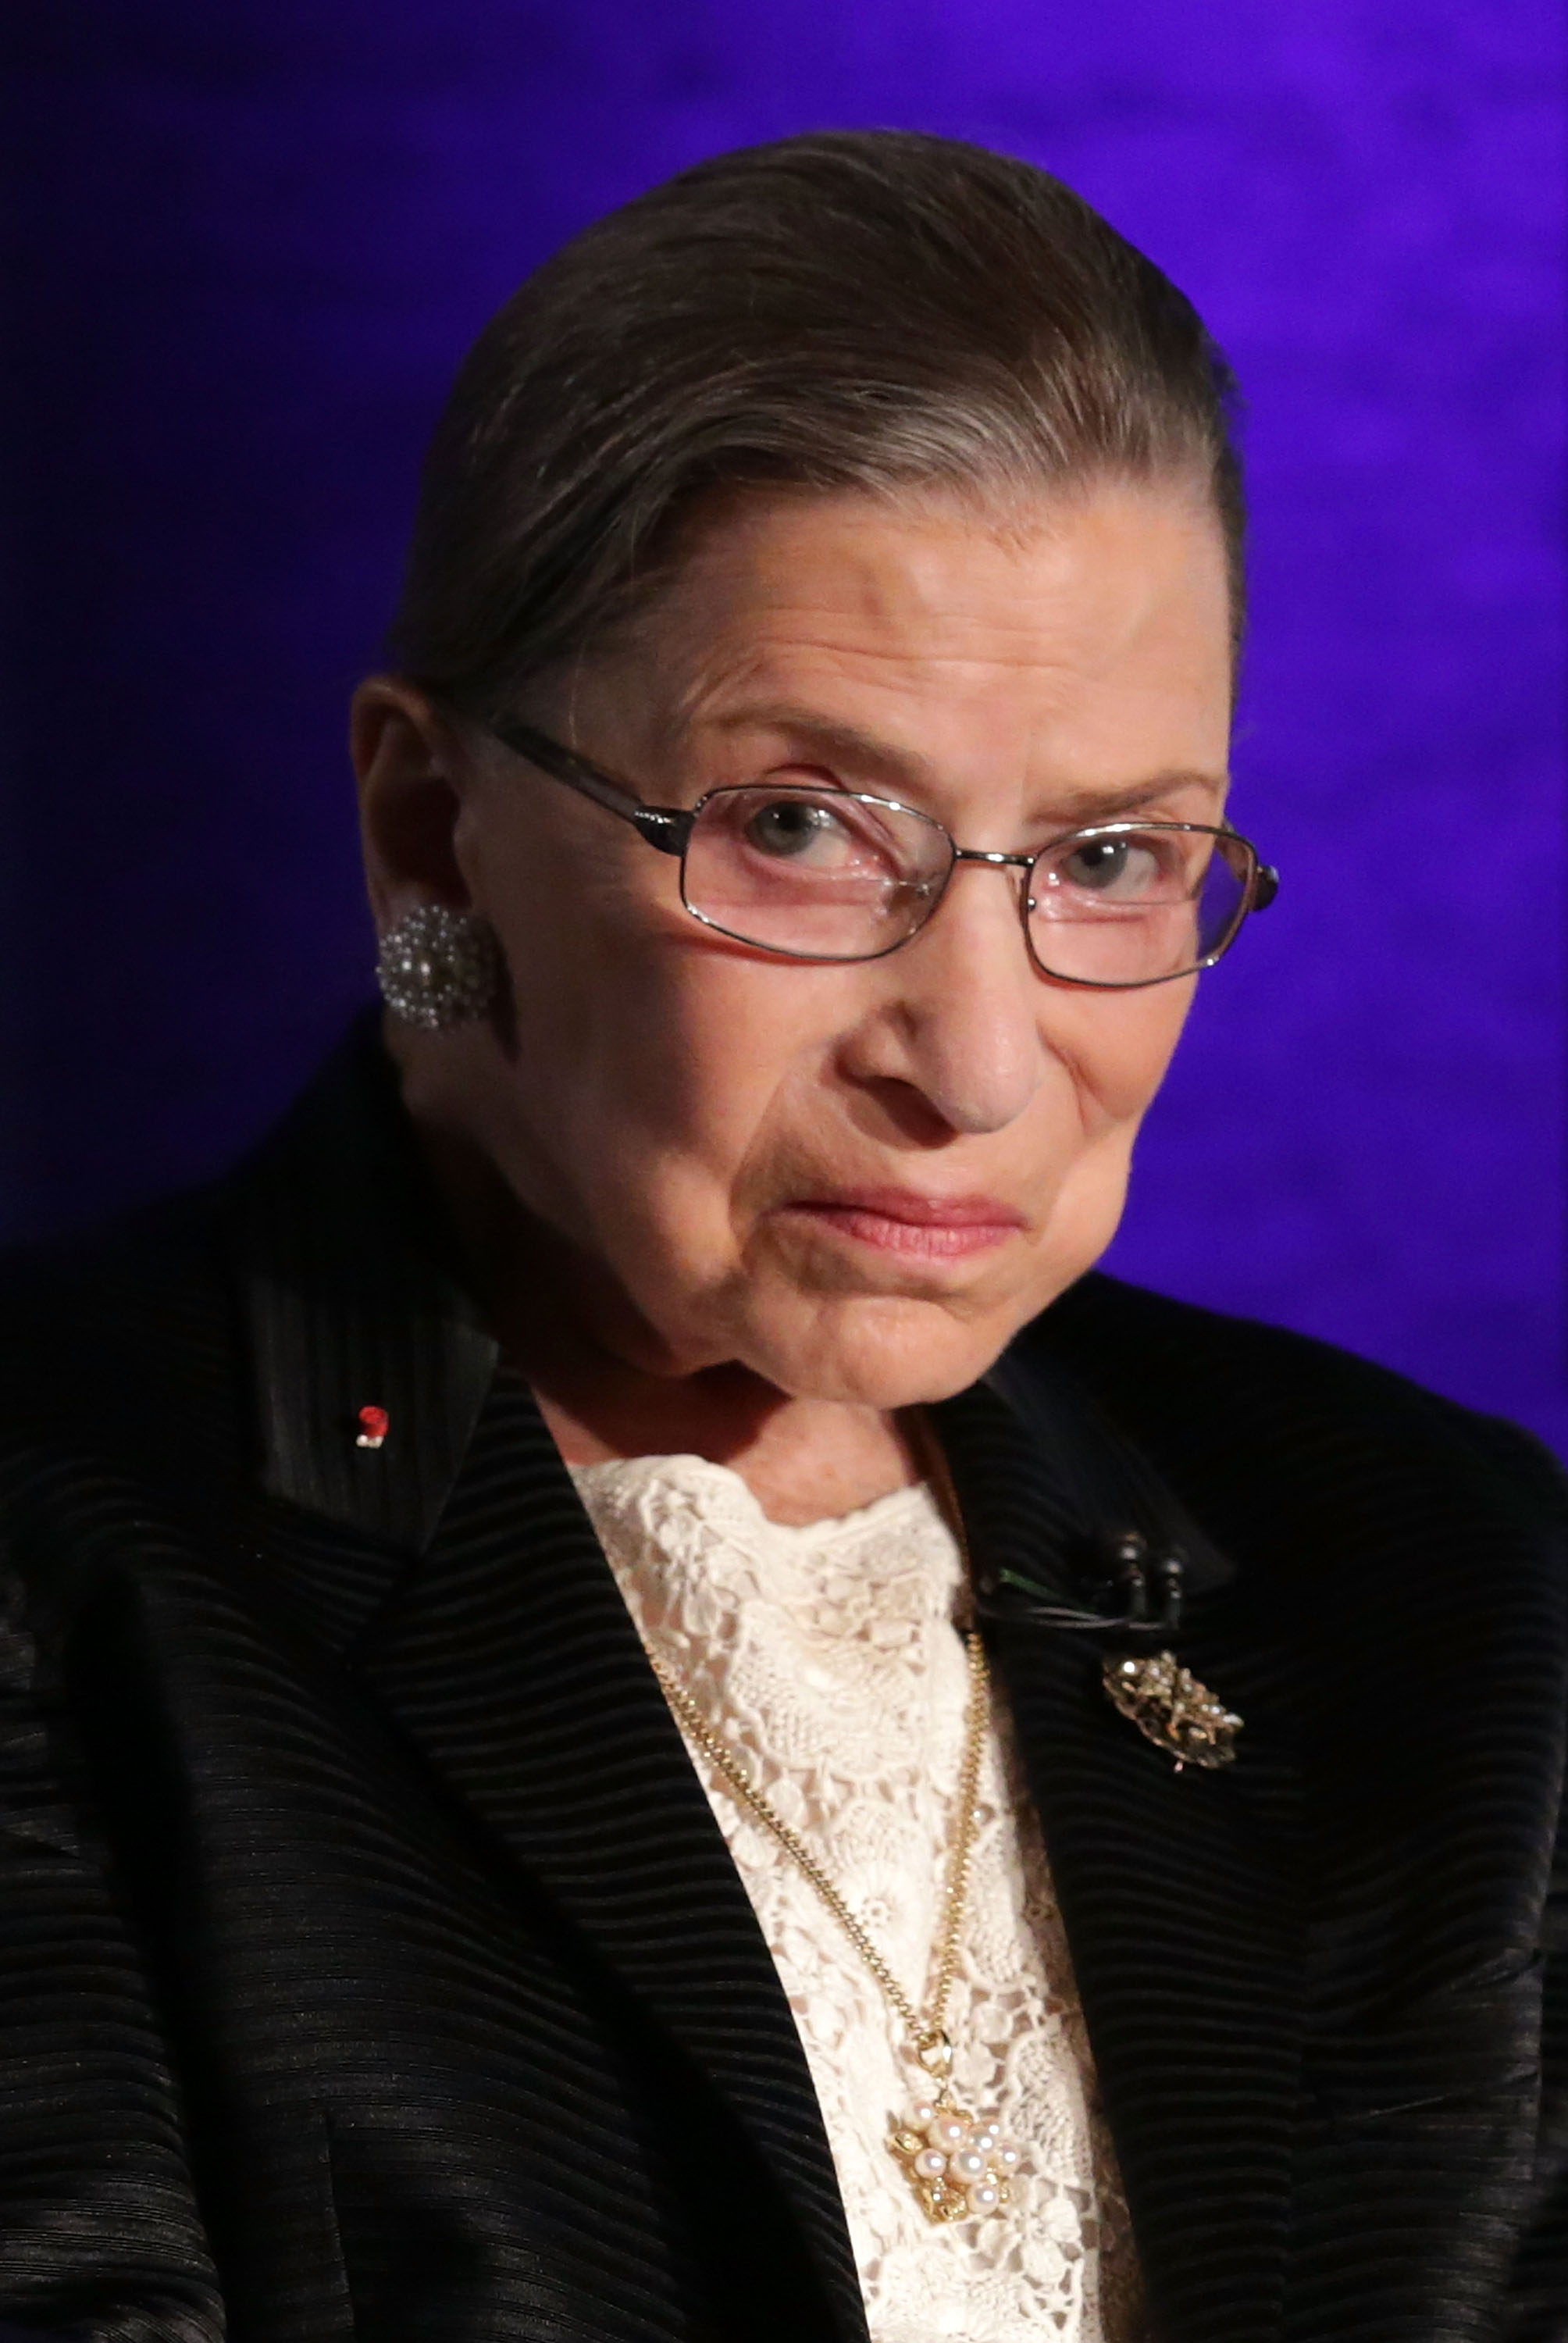 Supreme Court Justice Ruth Bader Ginsburg at the taping of "The Kalb Report" at the National Press Club in Washington, DC. on April 17, 2014.